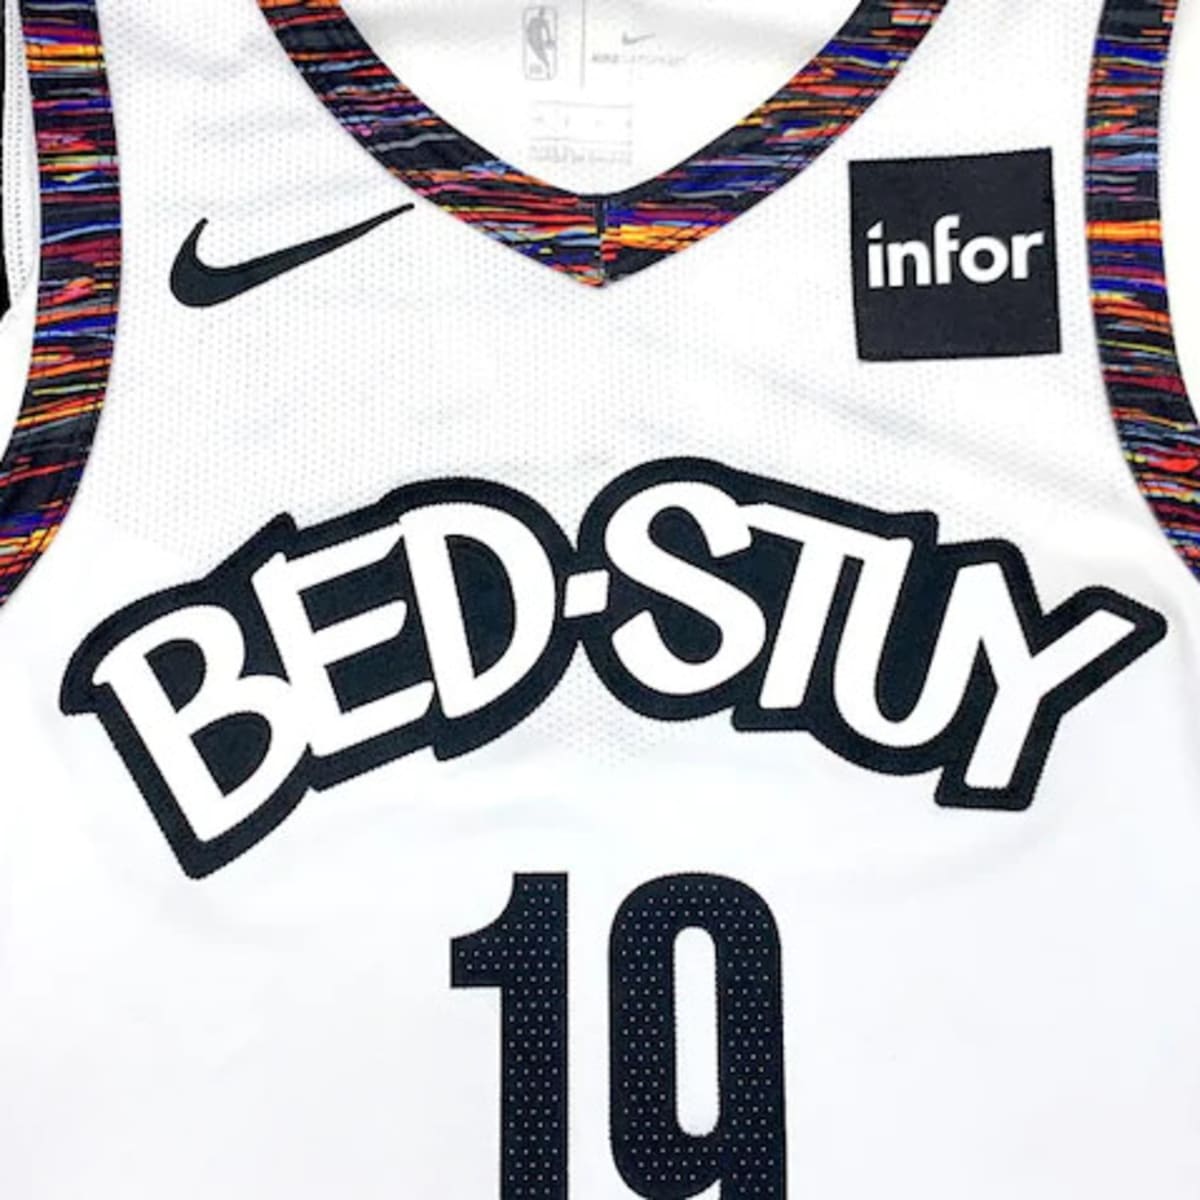 WHAT IS THIS FONT? NBA BEDSTUY BROOKLYN NETS - forum